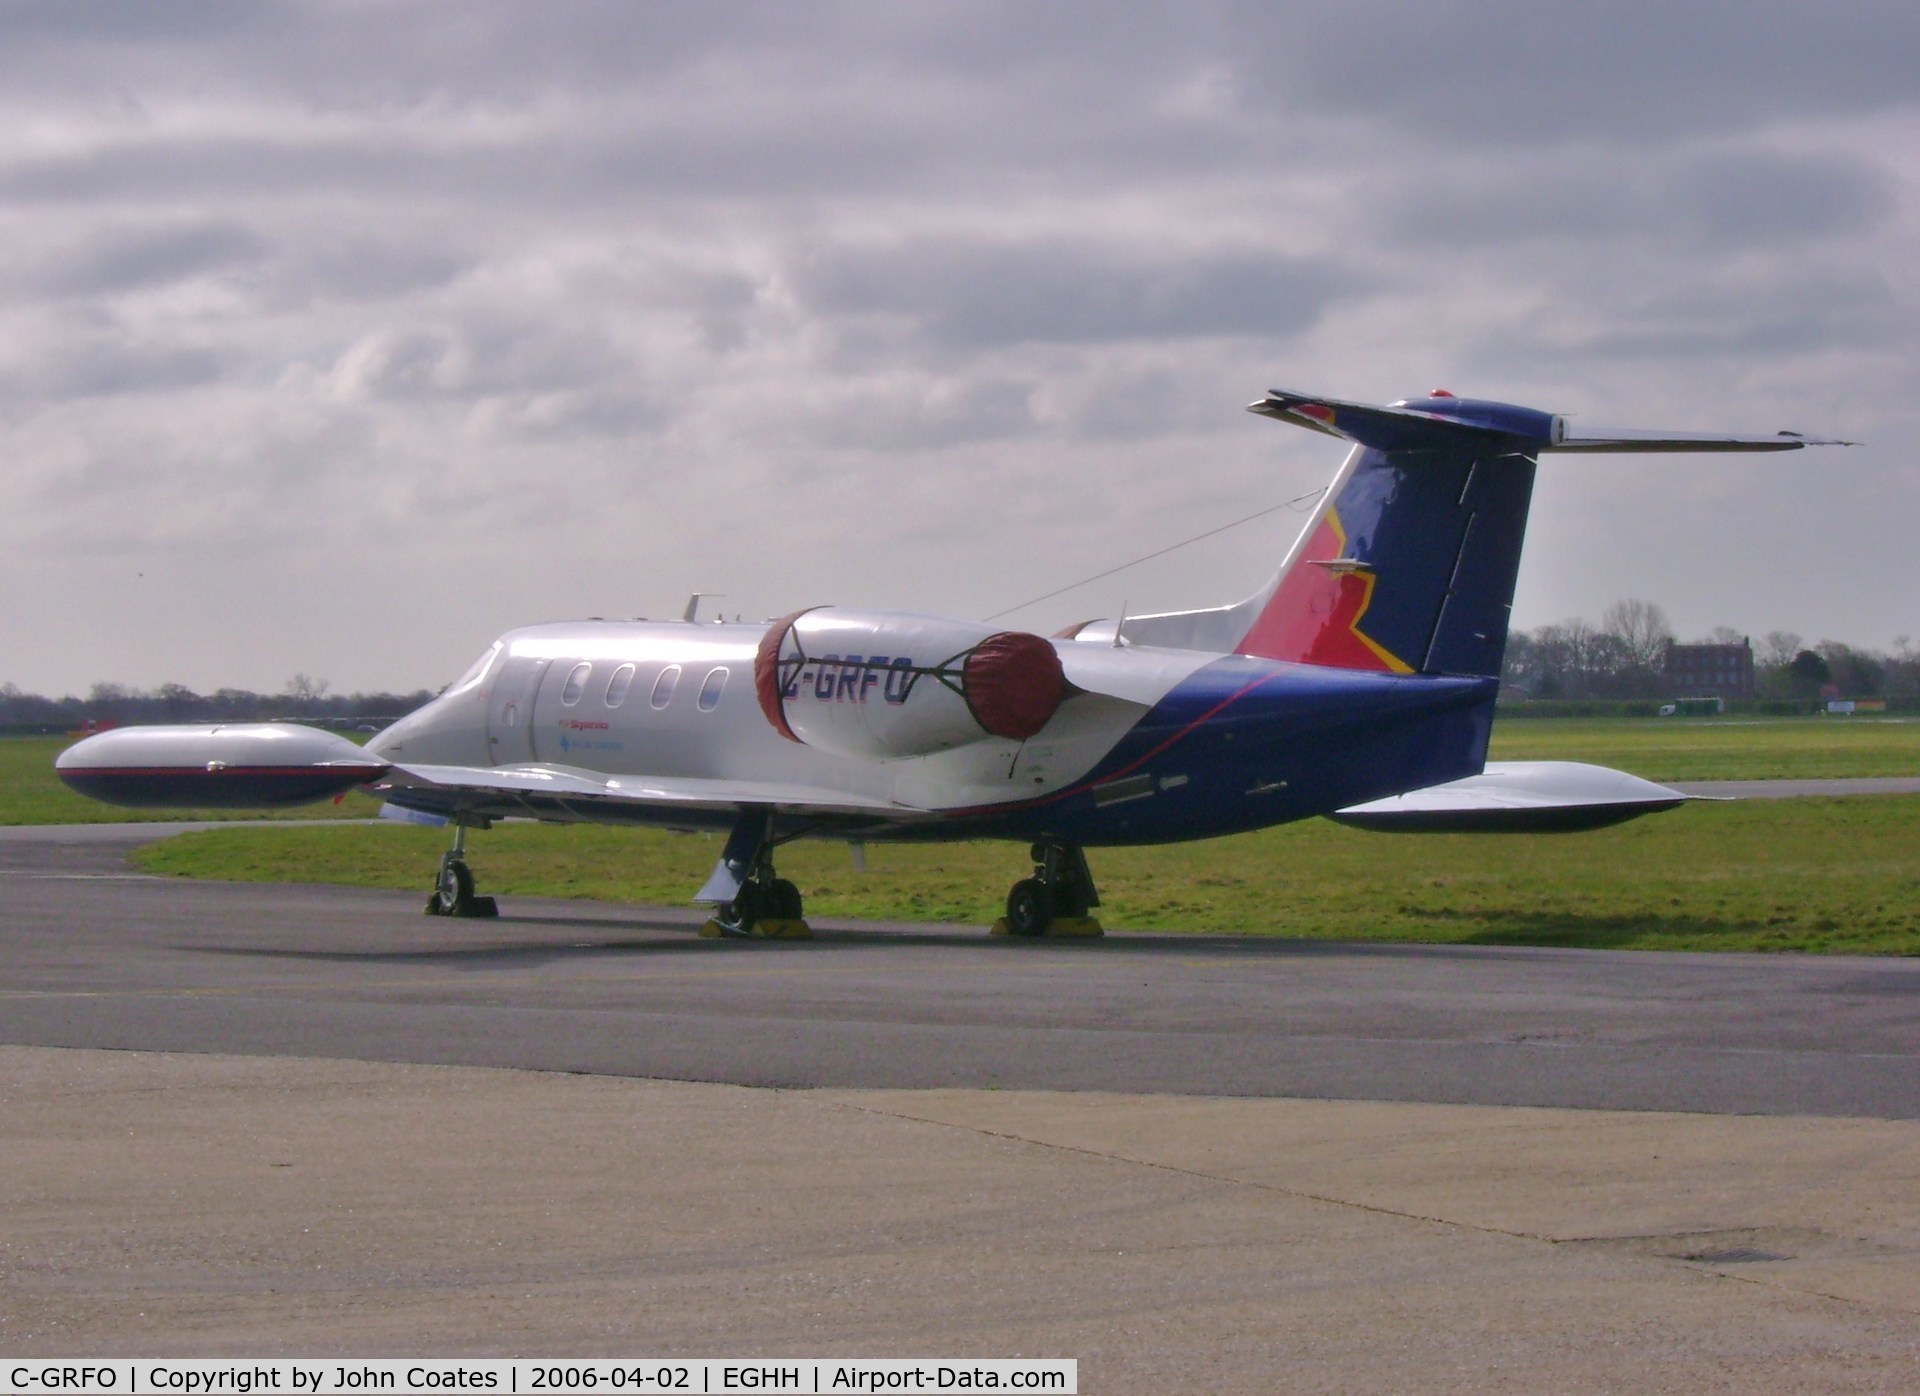 C-GRFO, 1977 Learjet 35A C/N 35A-100, Parked at Signatures